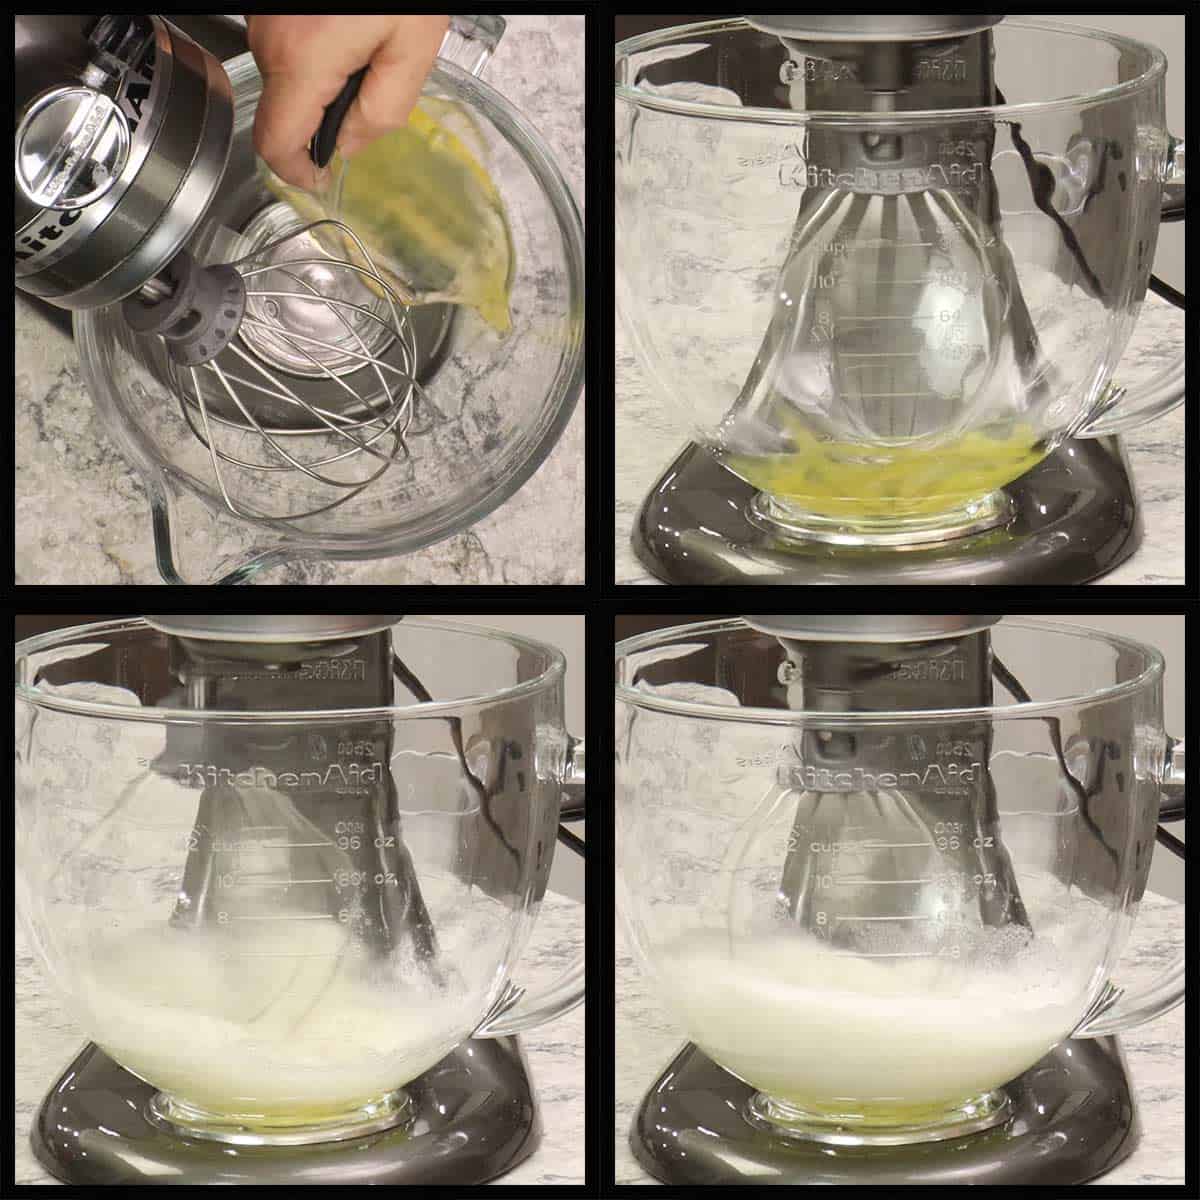 Whisking the egg whites in a stand mixer until they are frothy.